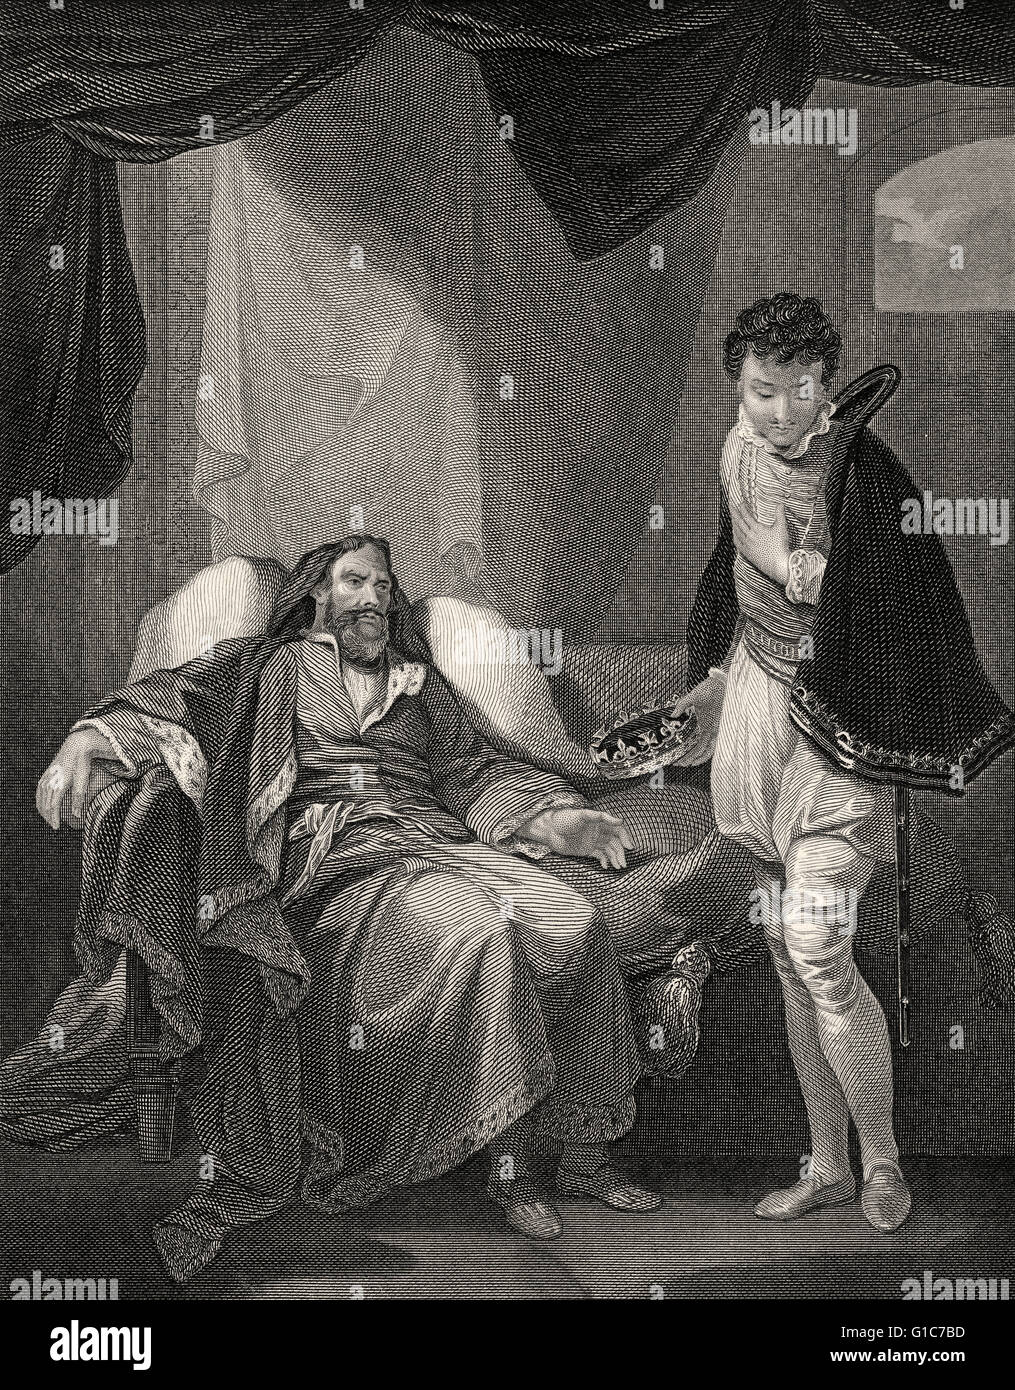 Henry IV, reproving Prince Henry, scene from King Henry IV part 2, act 4, scene 5, a history play by William Shakespeare Stock Photo